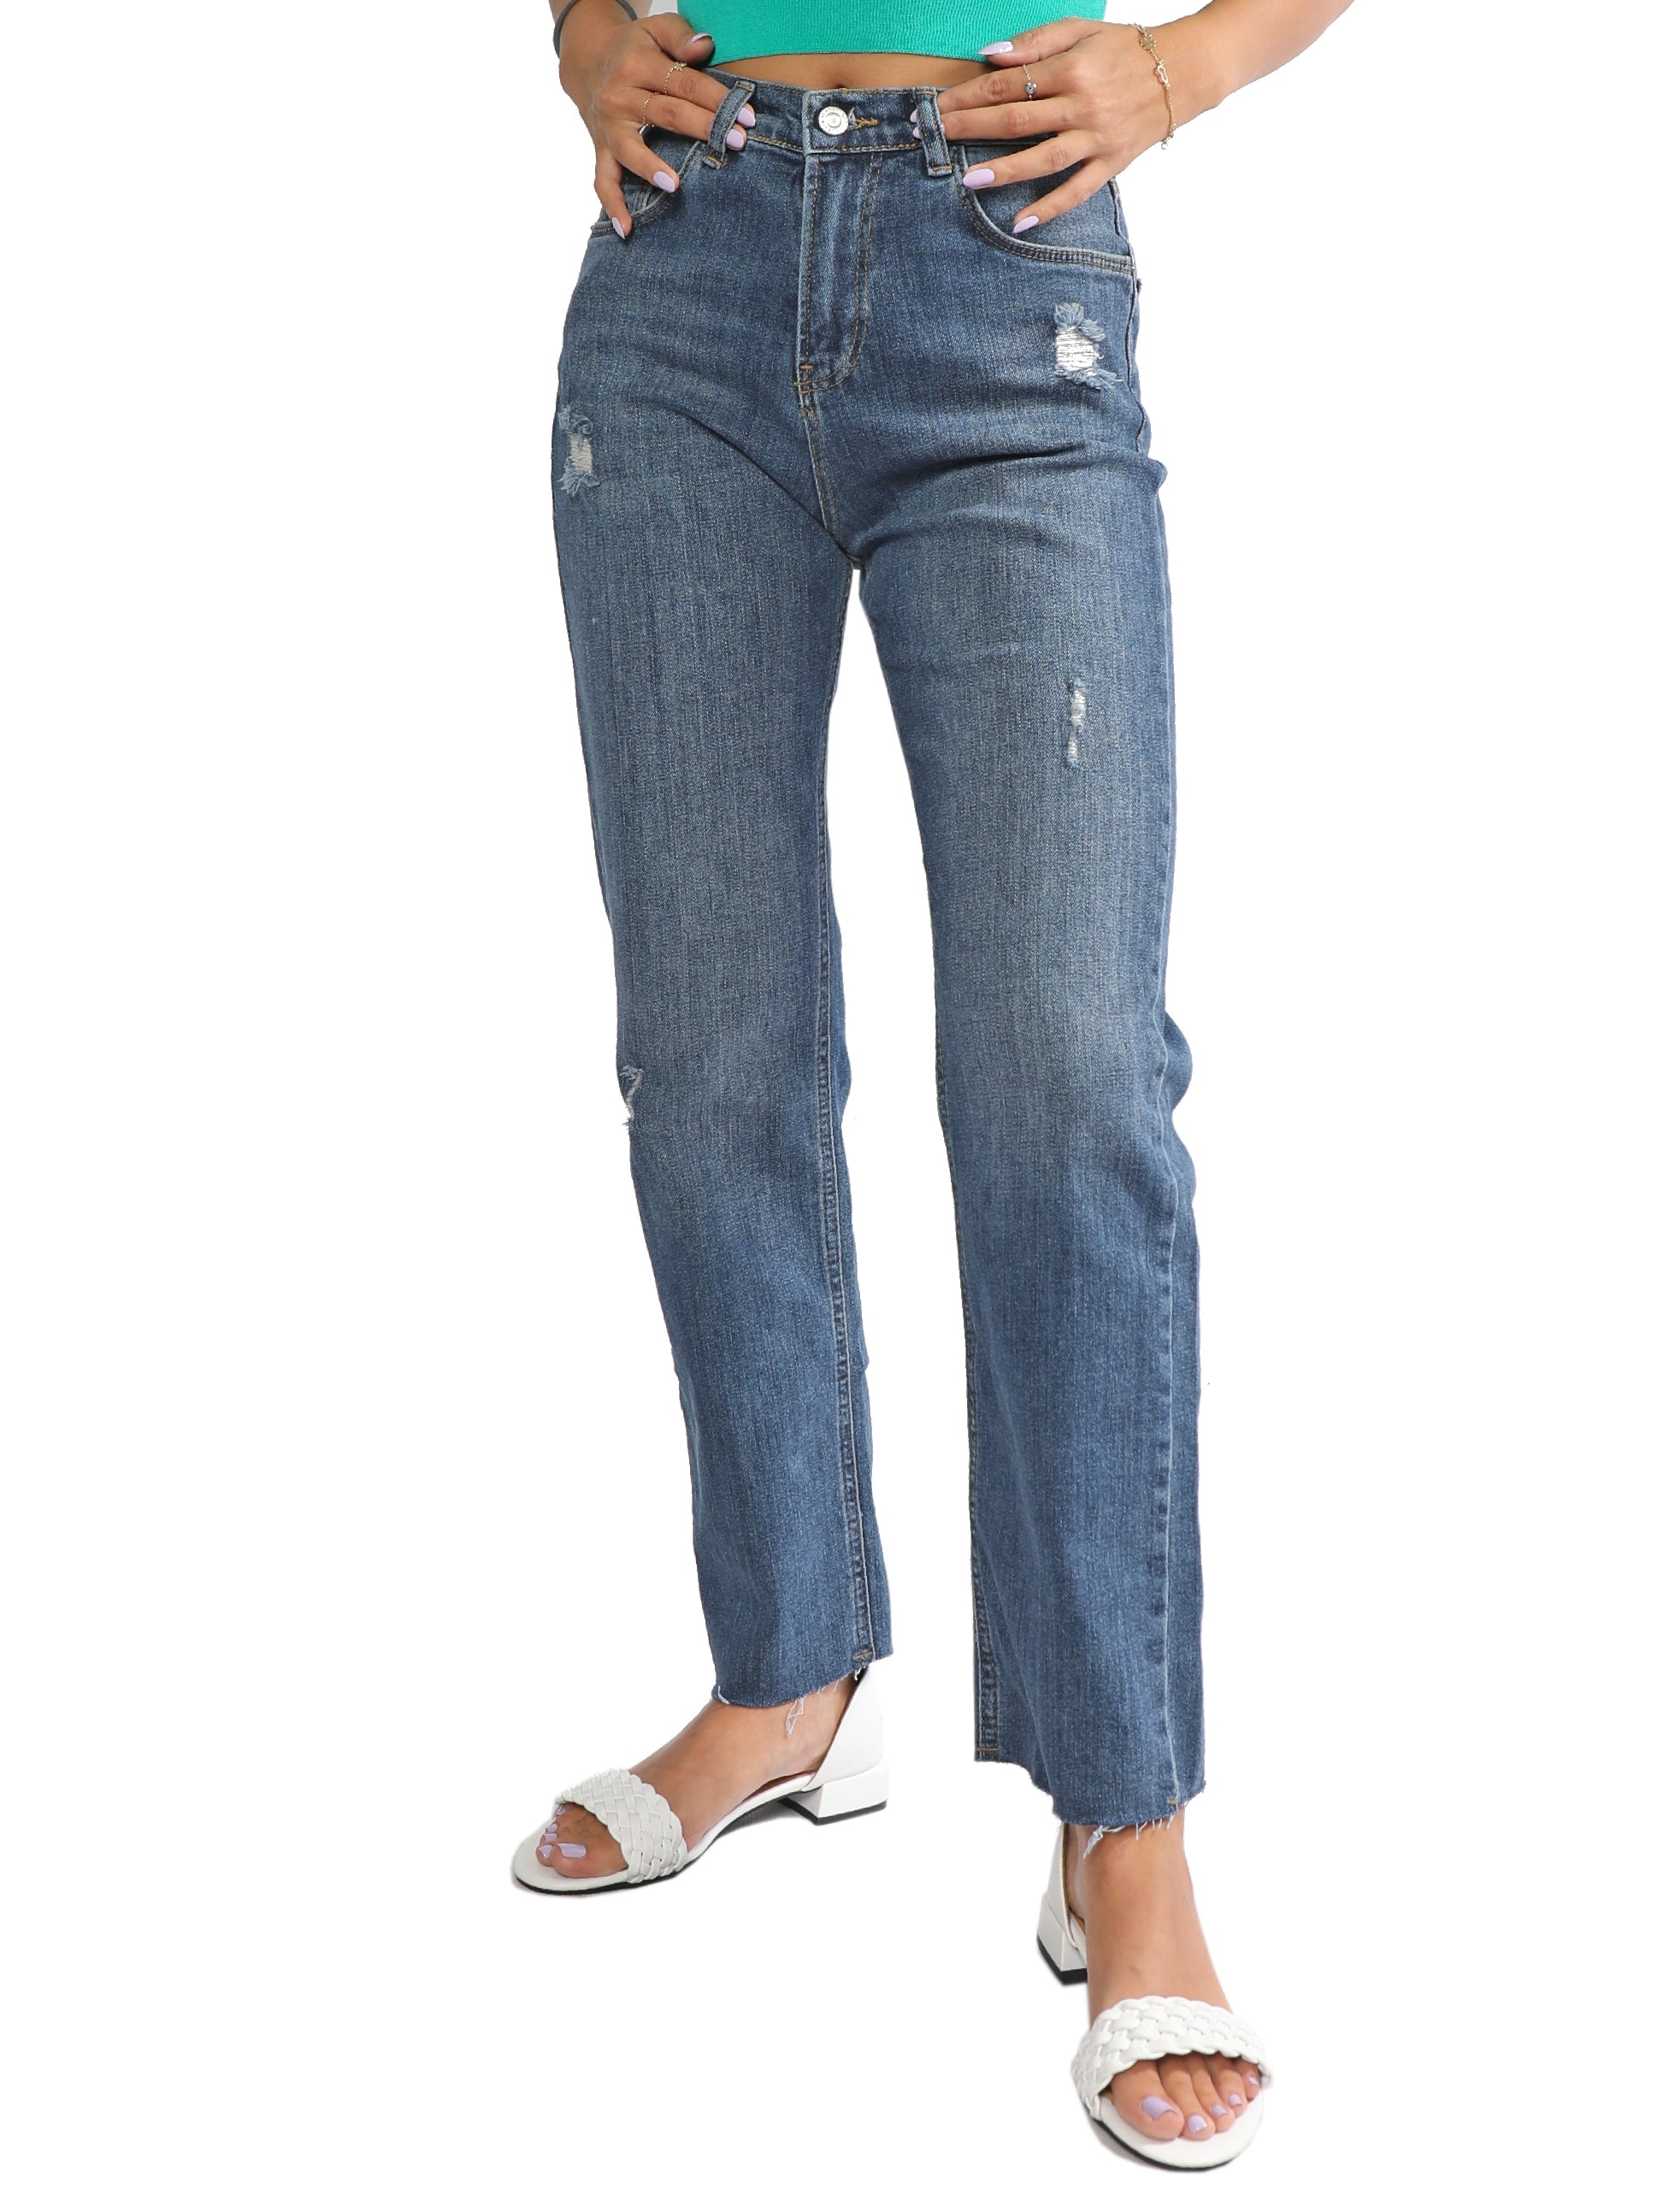 Women Denim Jeans With Simple Ripped Design